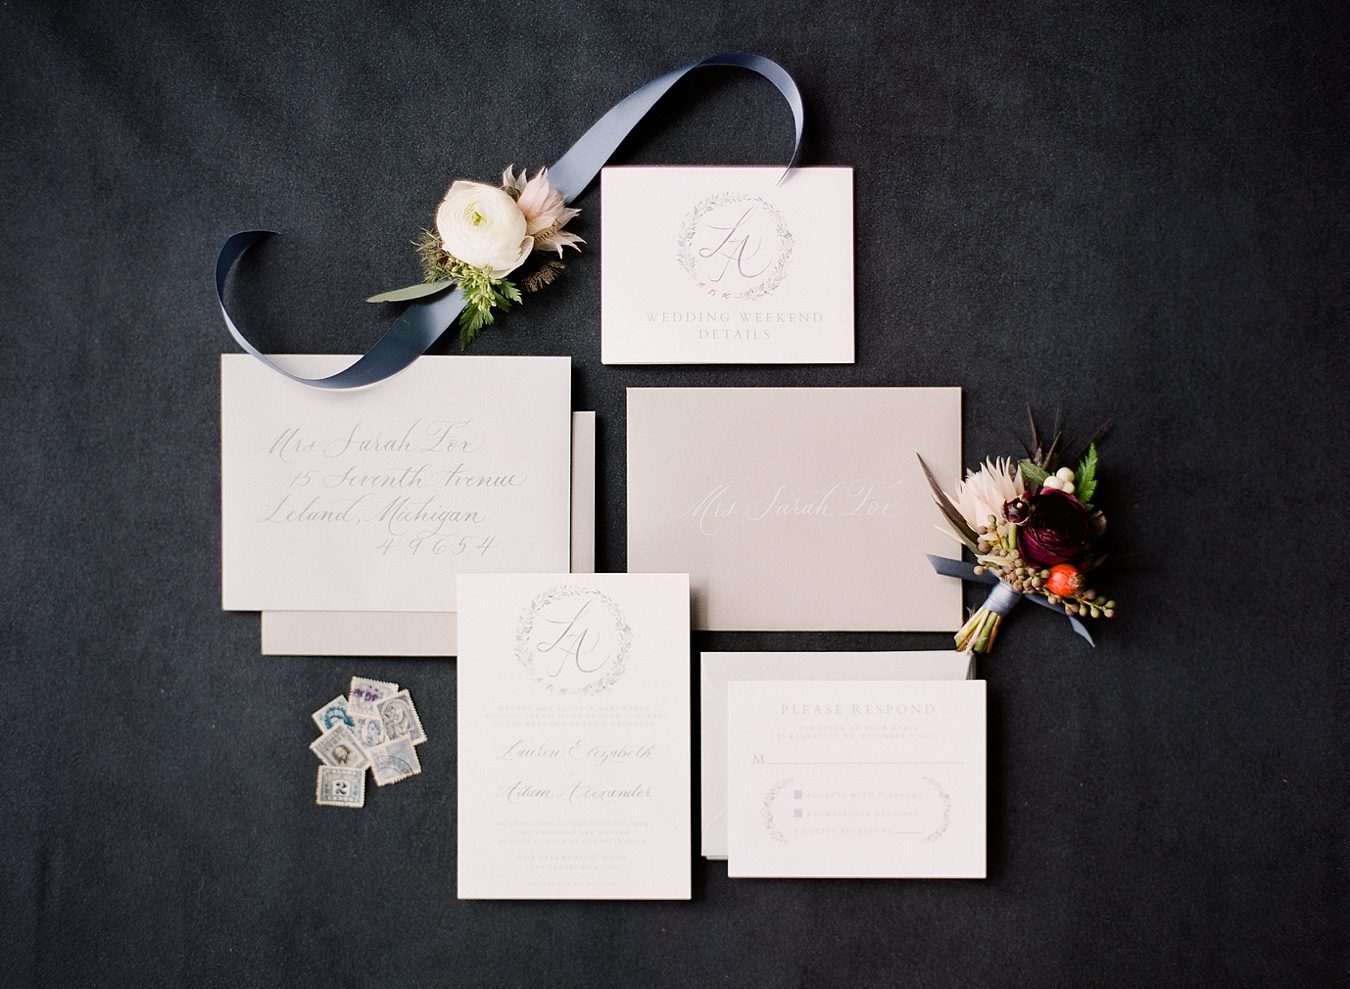 Traverse City Wedding Photographer | Holly Thomas Designs | Cory Weber Photography | Sincerely, Ginger Event Design & Production | BLOOM Floral Design